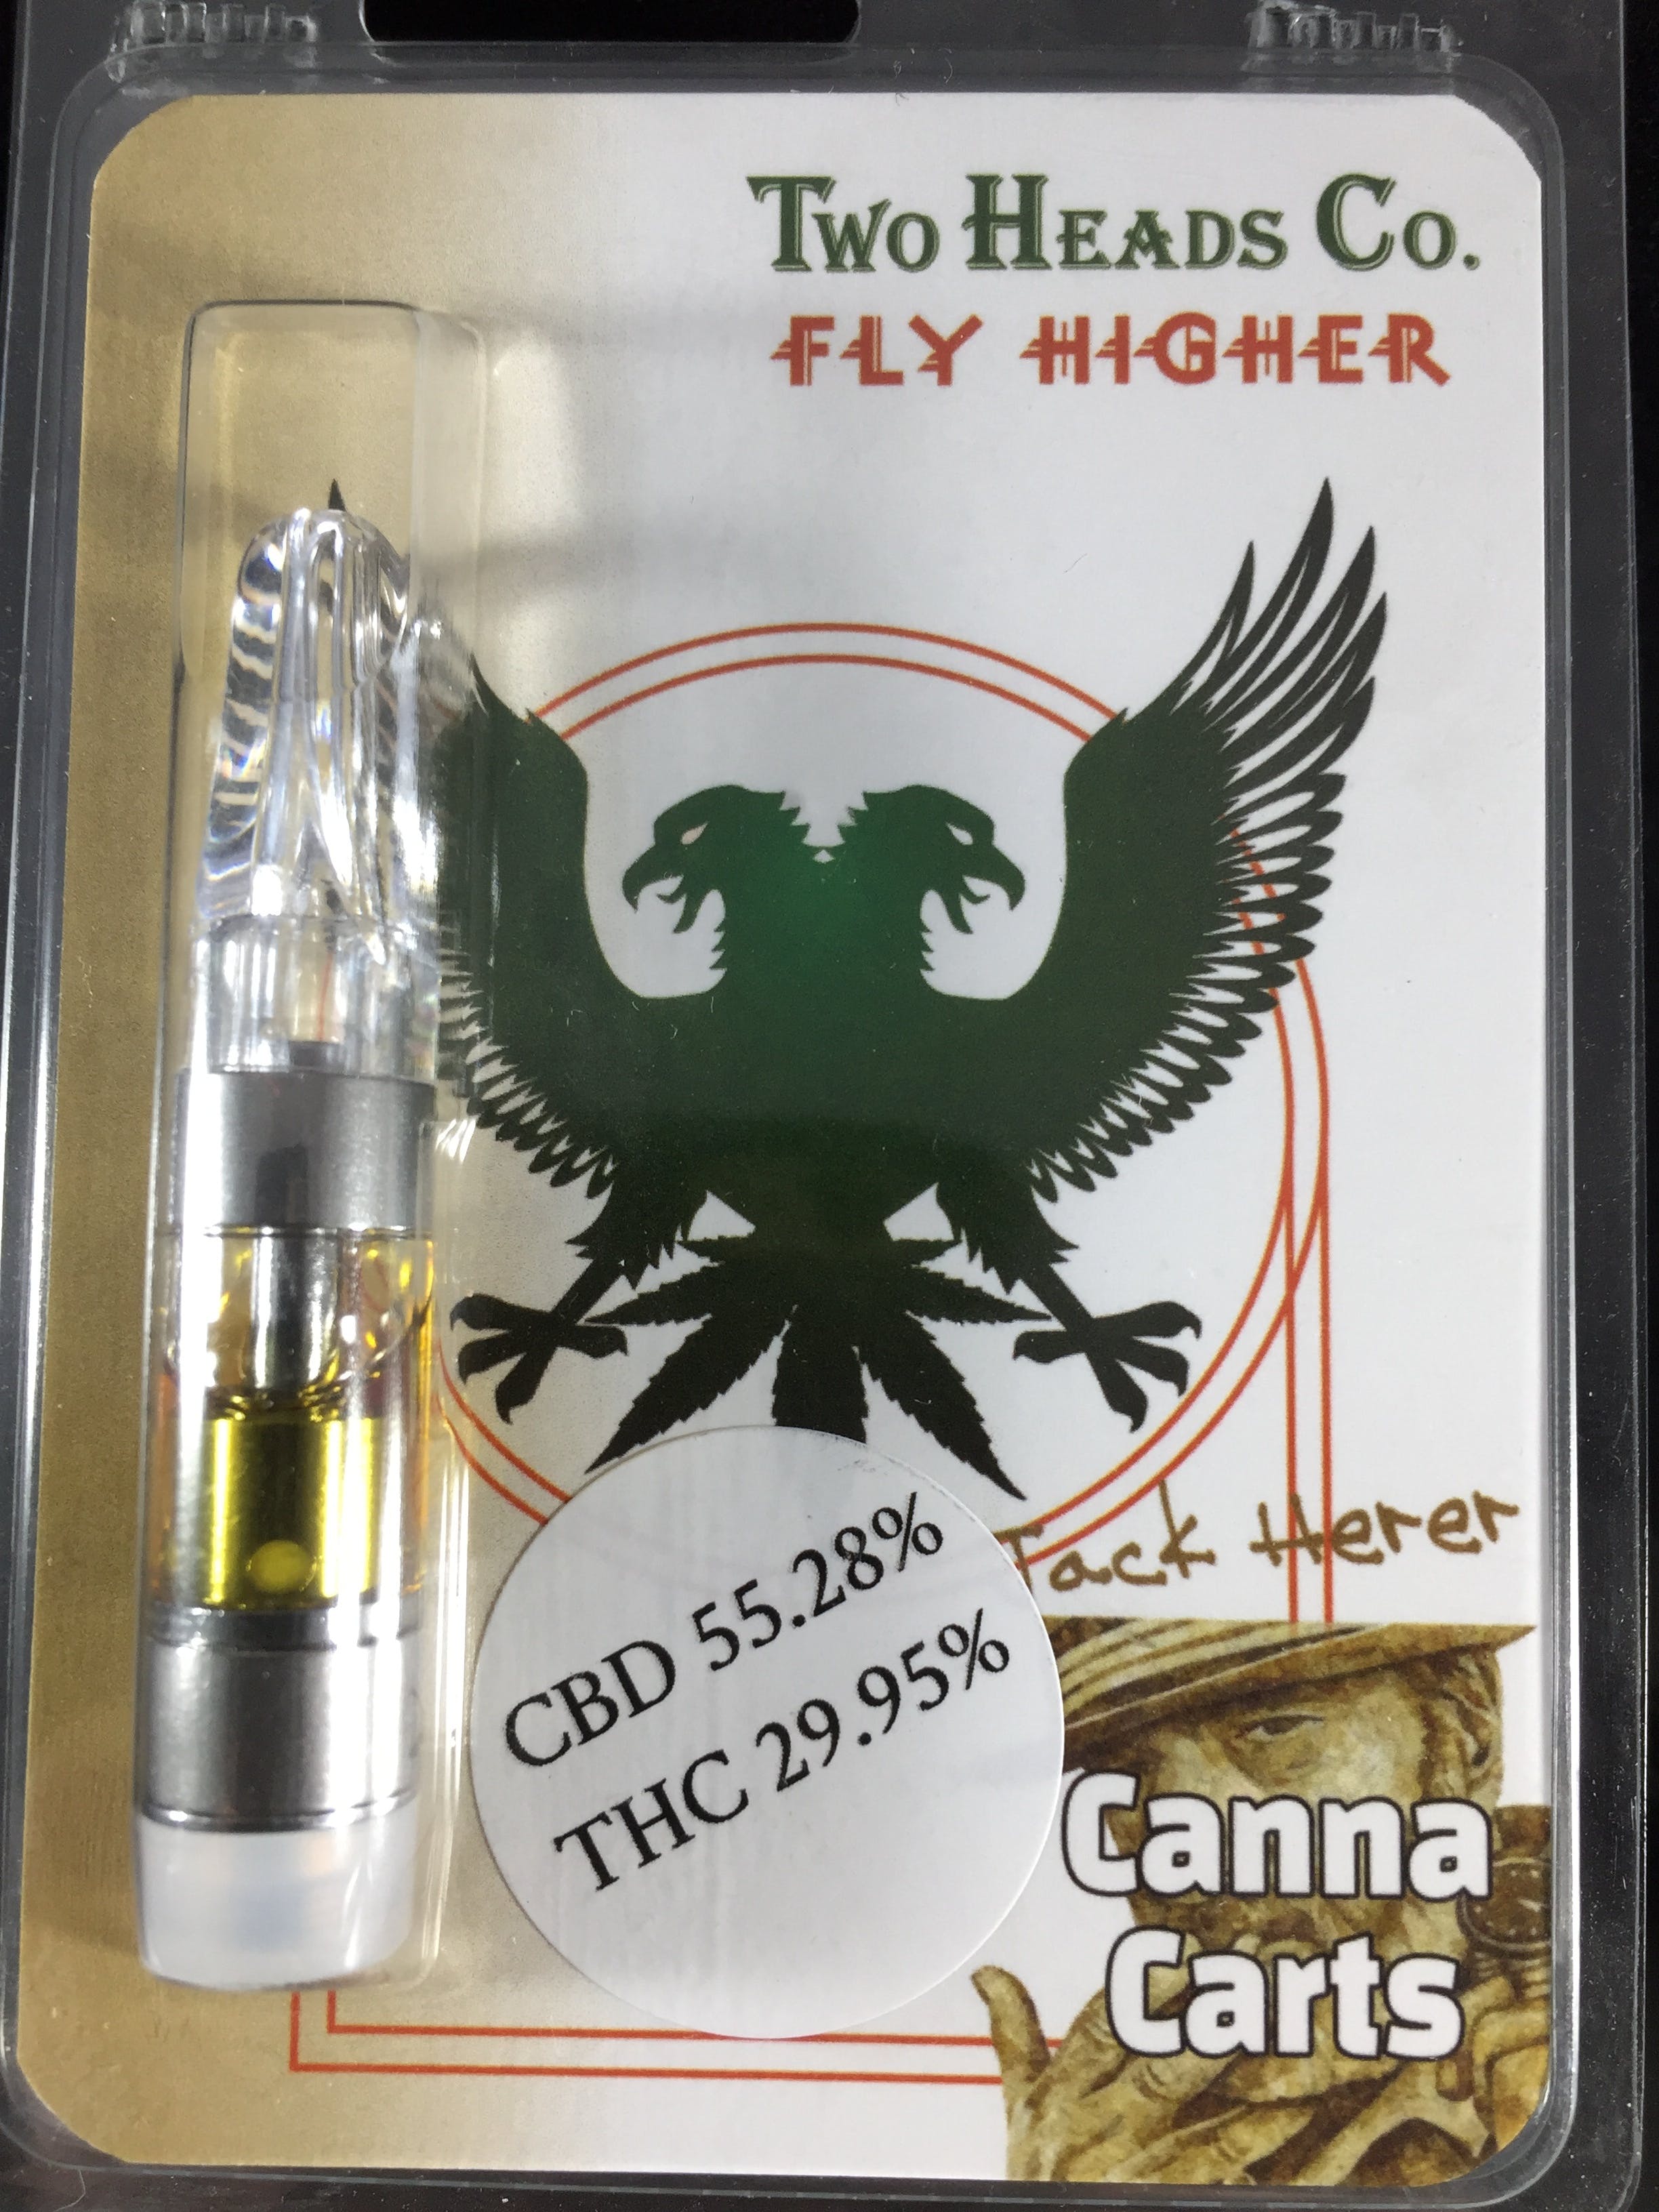 concentrate-jack-herer-cartridges-by-two-heads